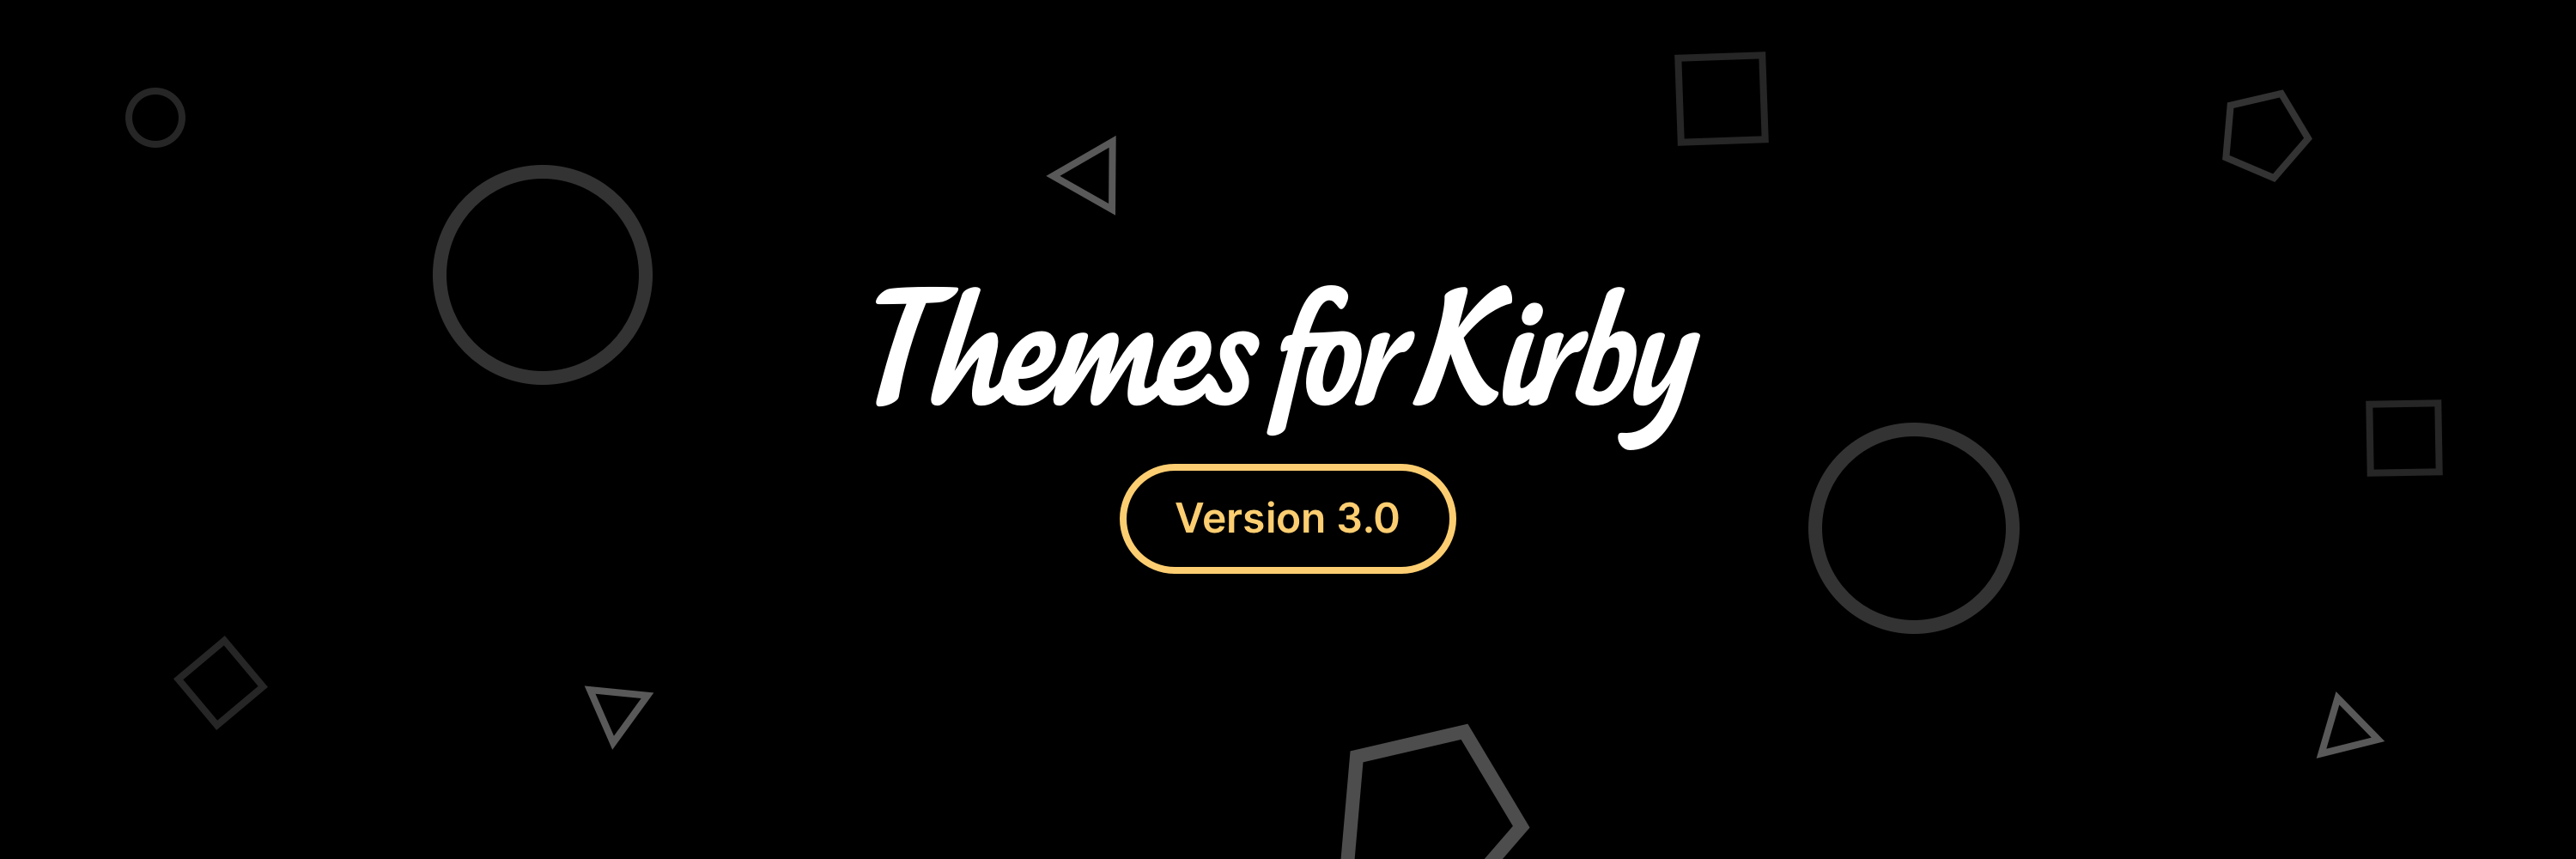 Themes for Kirby 3.0